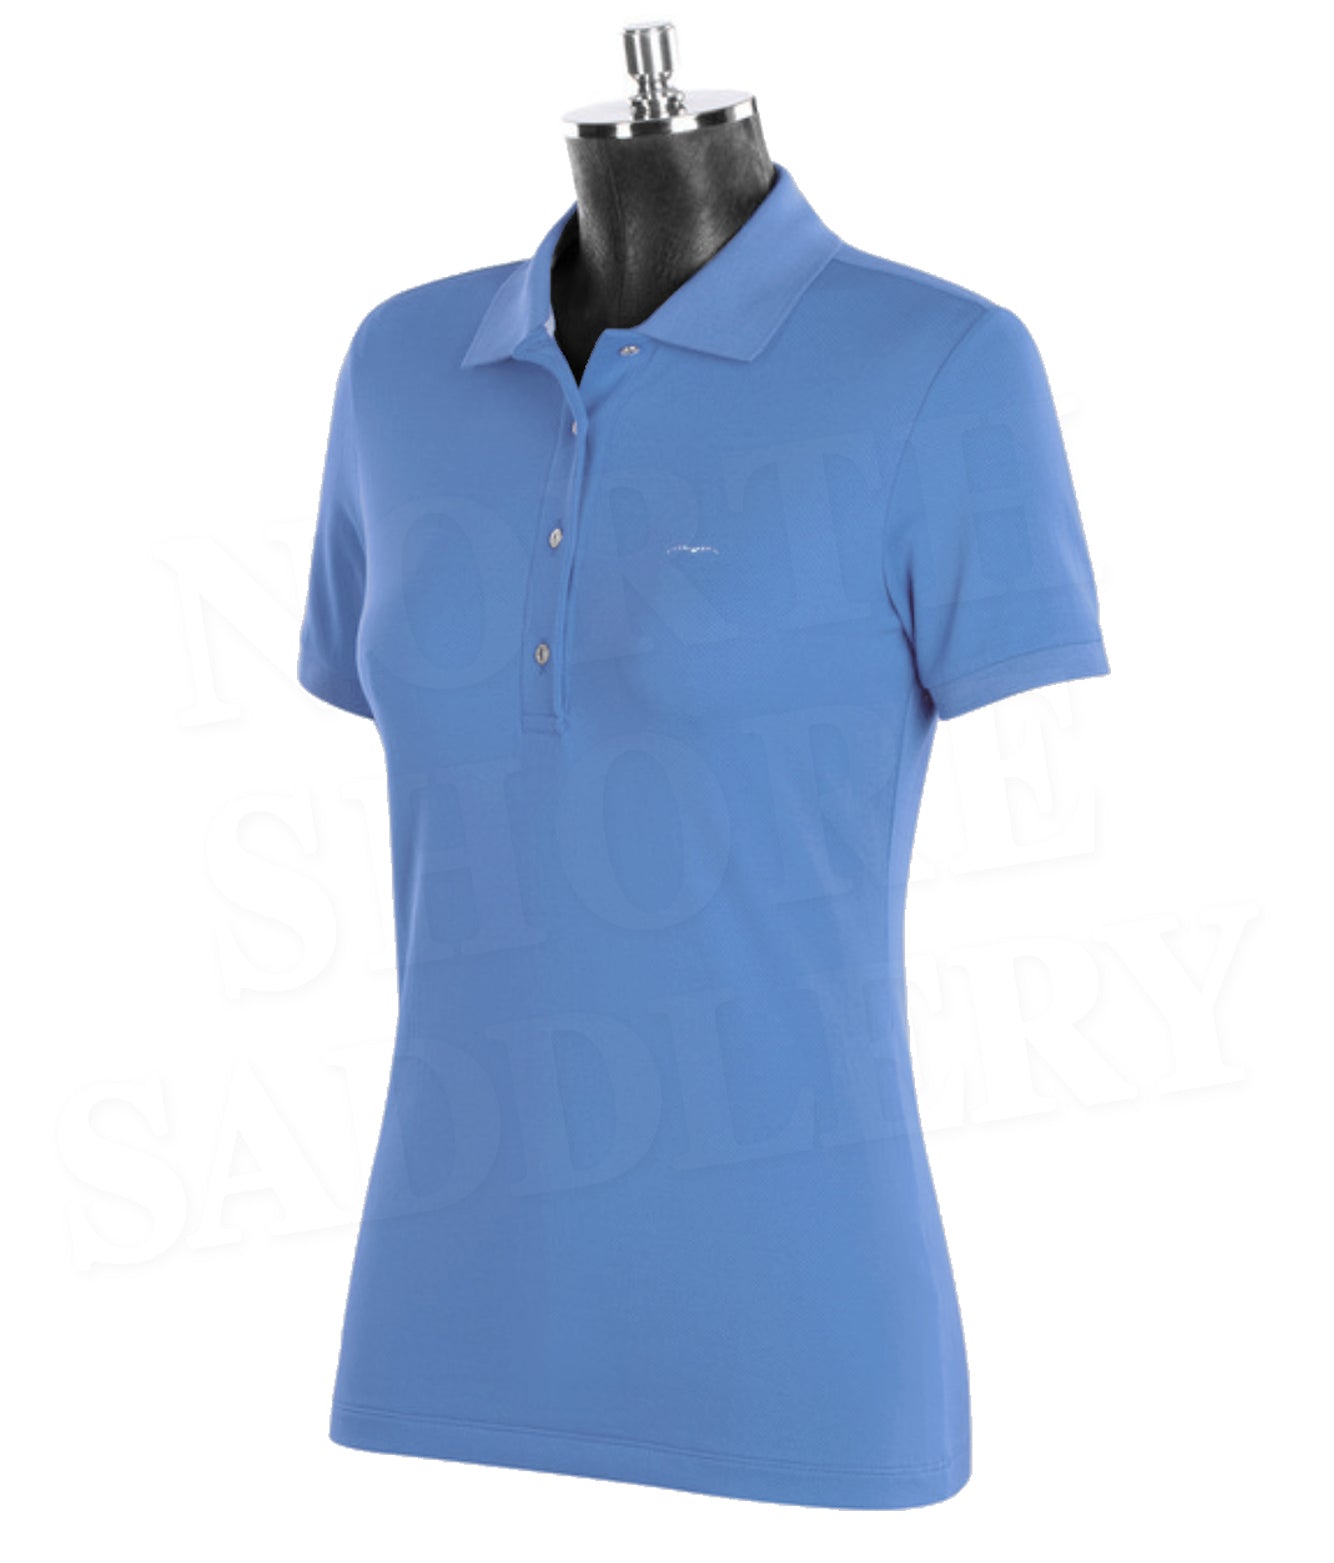 Animo Biarritz Short Sleeve Competition Polo - SALE - North Shore Saddlery